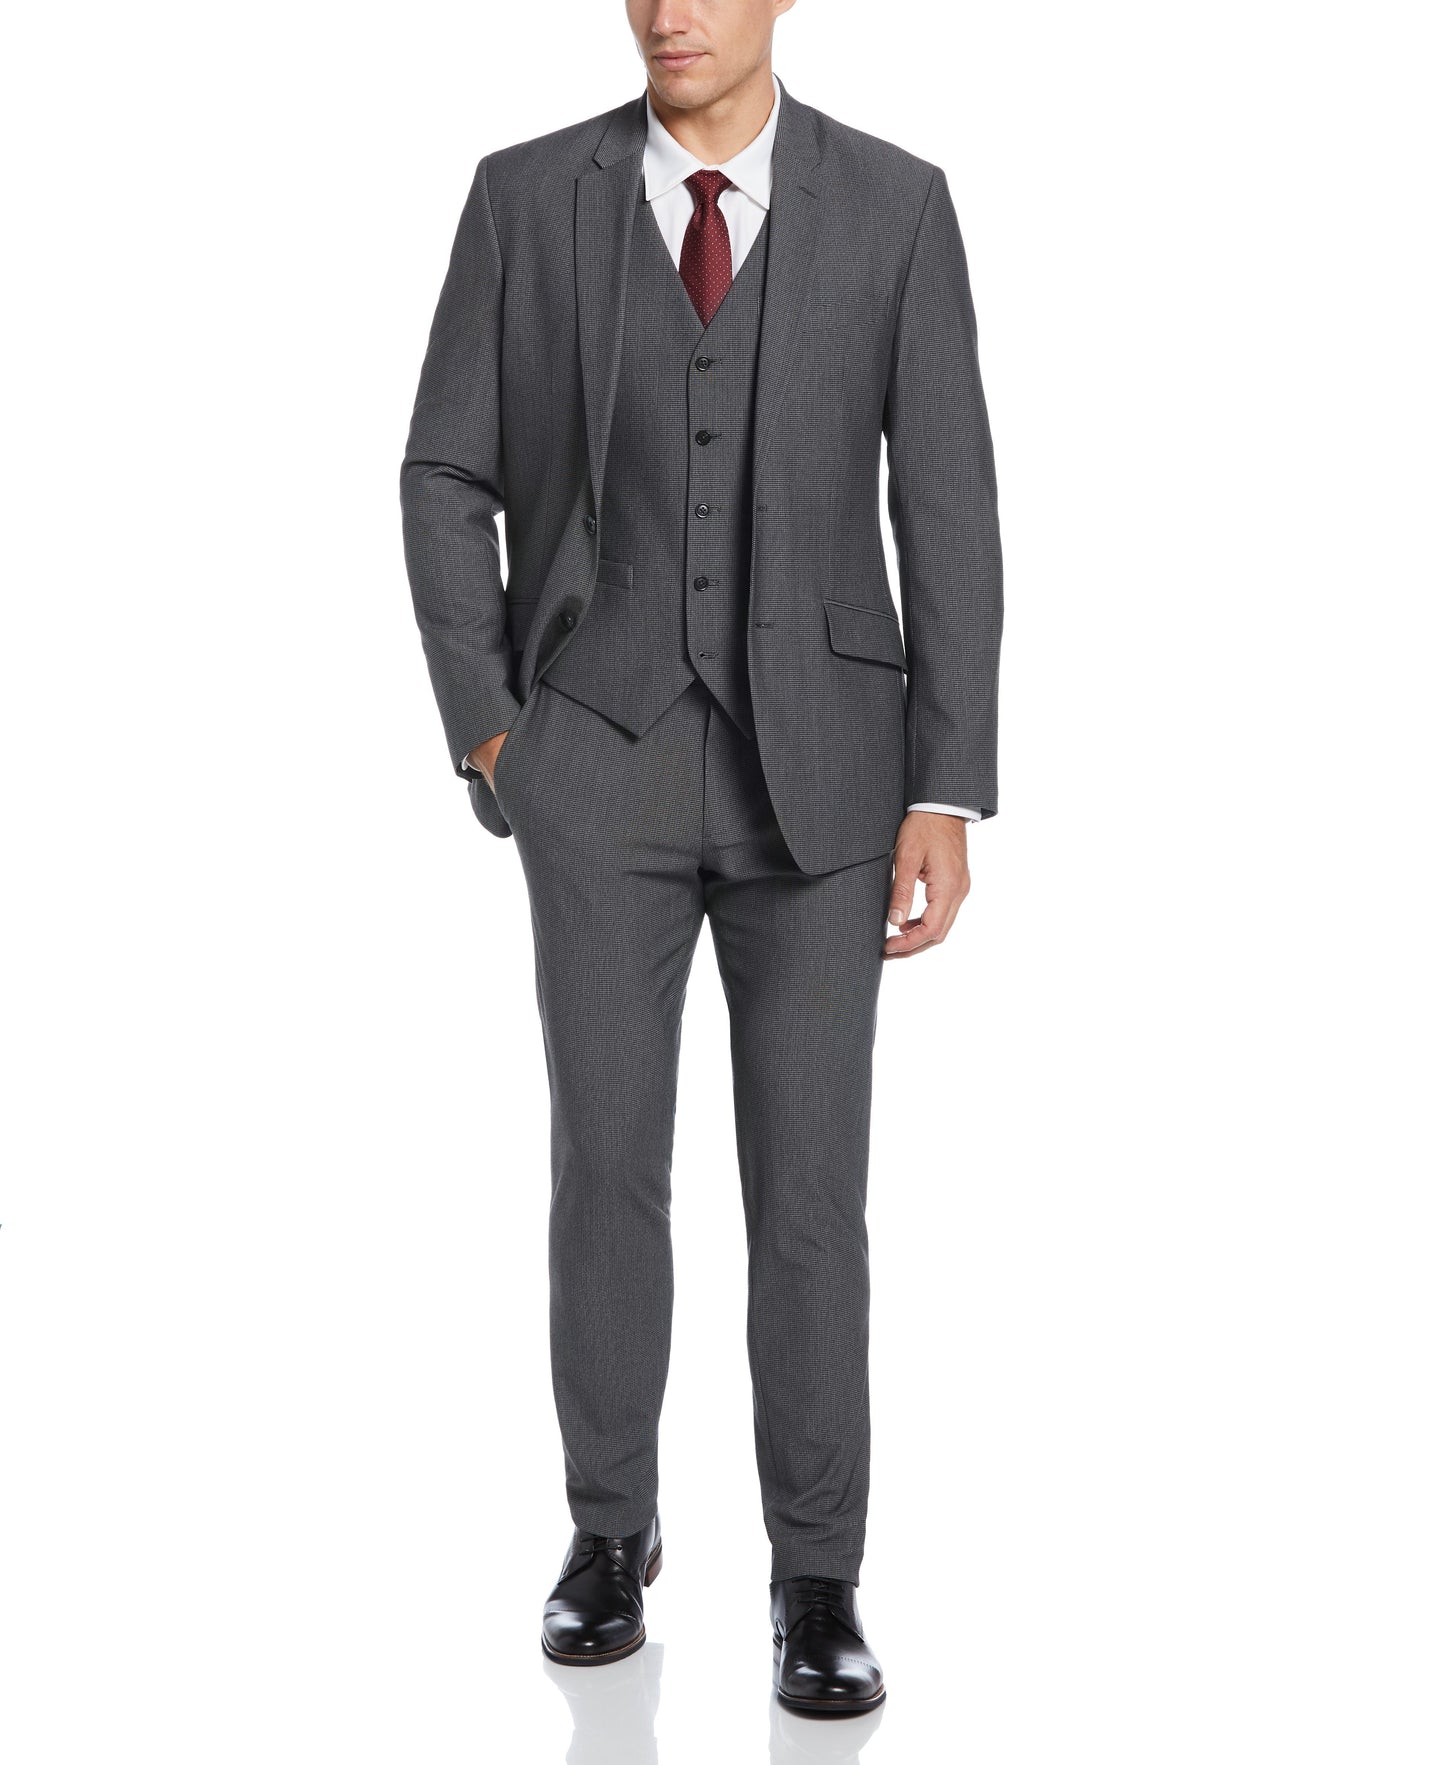 Very Slim Fit Stretch Micro Houndstooth Suit Jacket